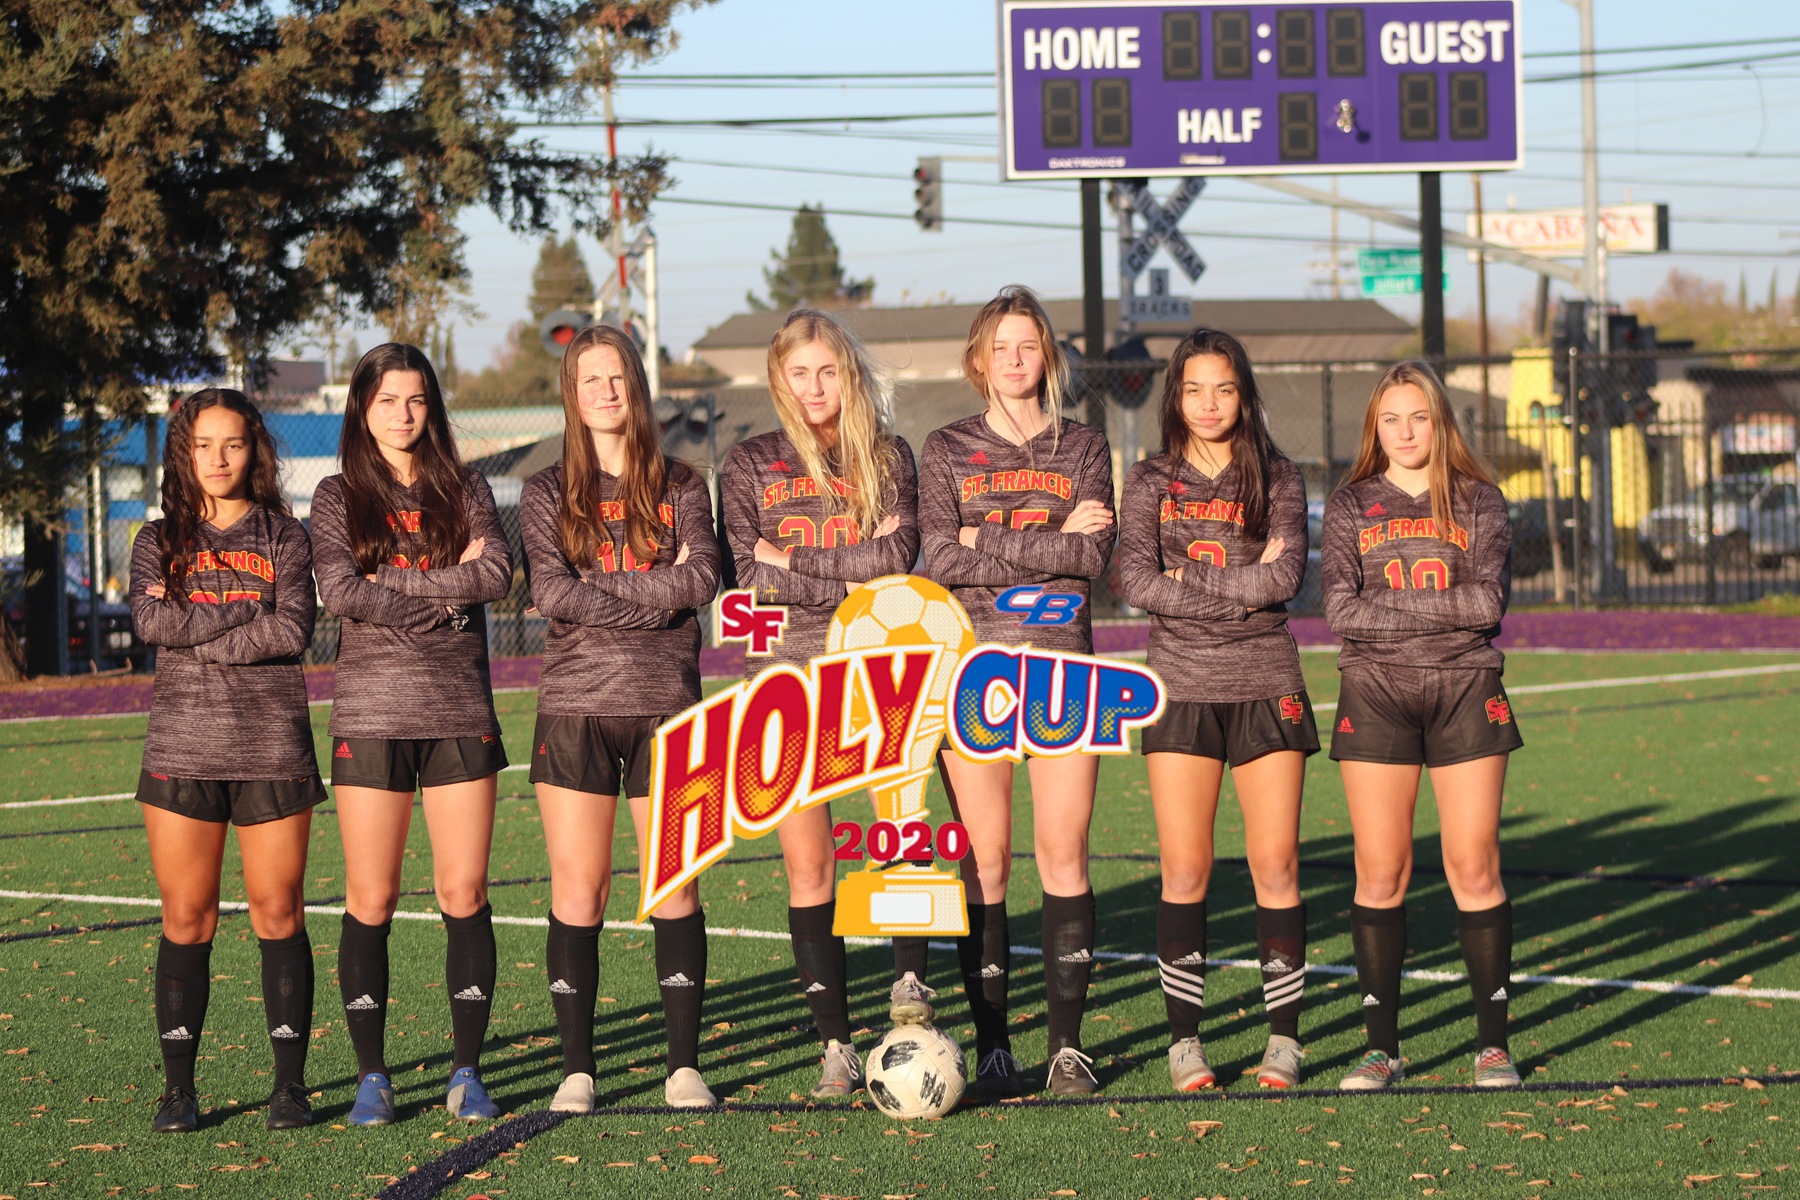 Soccer Program Collecting Donations for Saint John’s Program for Real Change at Holy Cup